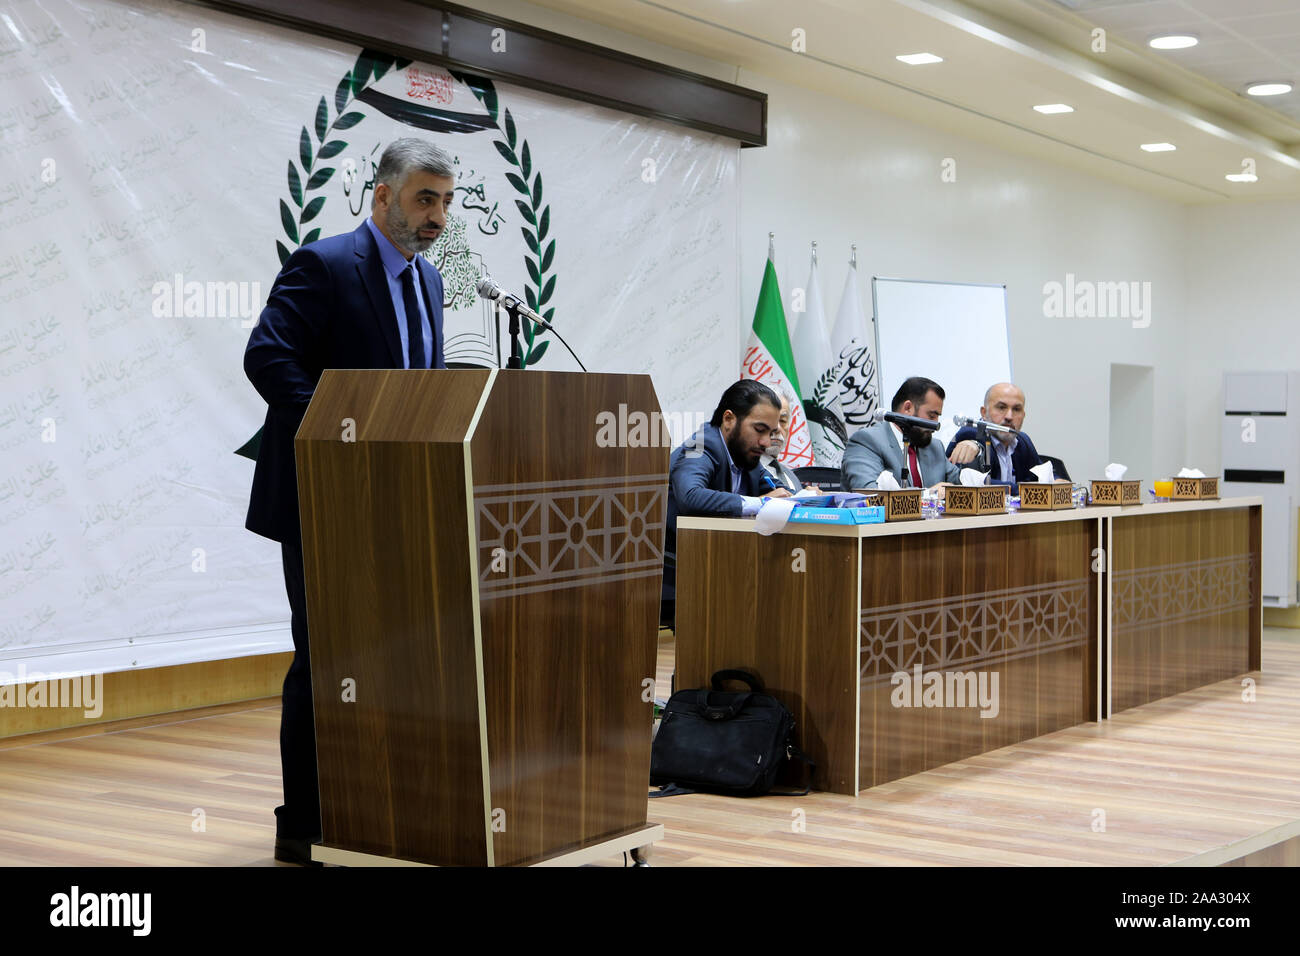 November 18, 2019: Bab al-Hawua, Syria. 18 November 2019. Engineer Ali Keda  gives a speech after being elected prime minister of the General  Consultative Council during an emergency session of the General